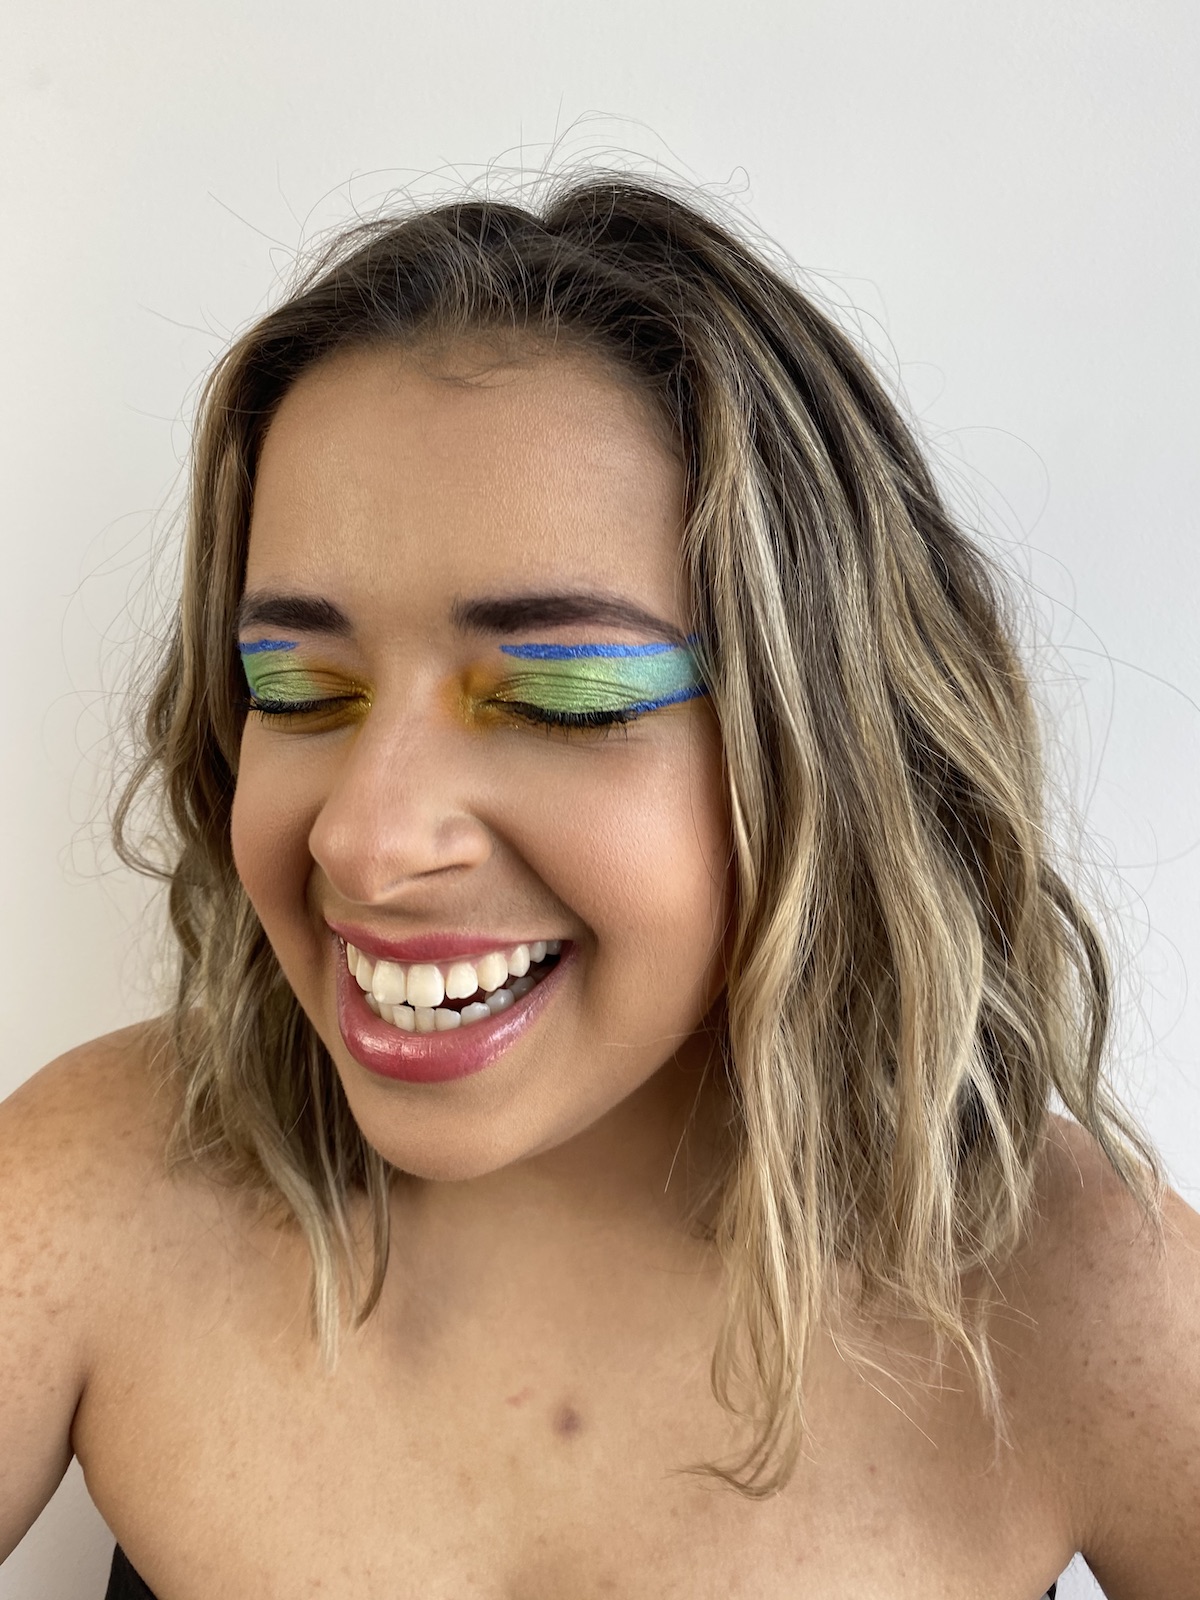 The author, Olivia Zayas Ryan, is caught laughing and smiling with her mouth open, teeth showing. Her eyes are closed and she has dramatic makeup on, shades of green and blue and yellow. Her expression is happy.